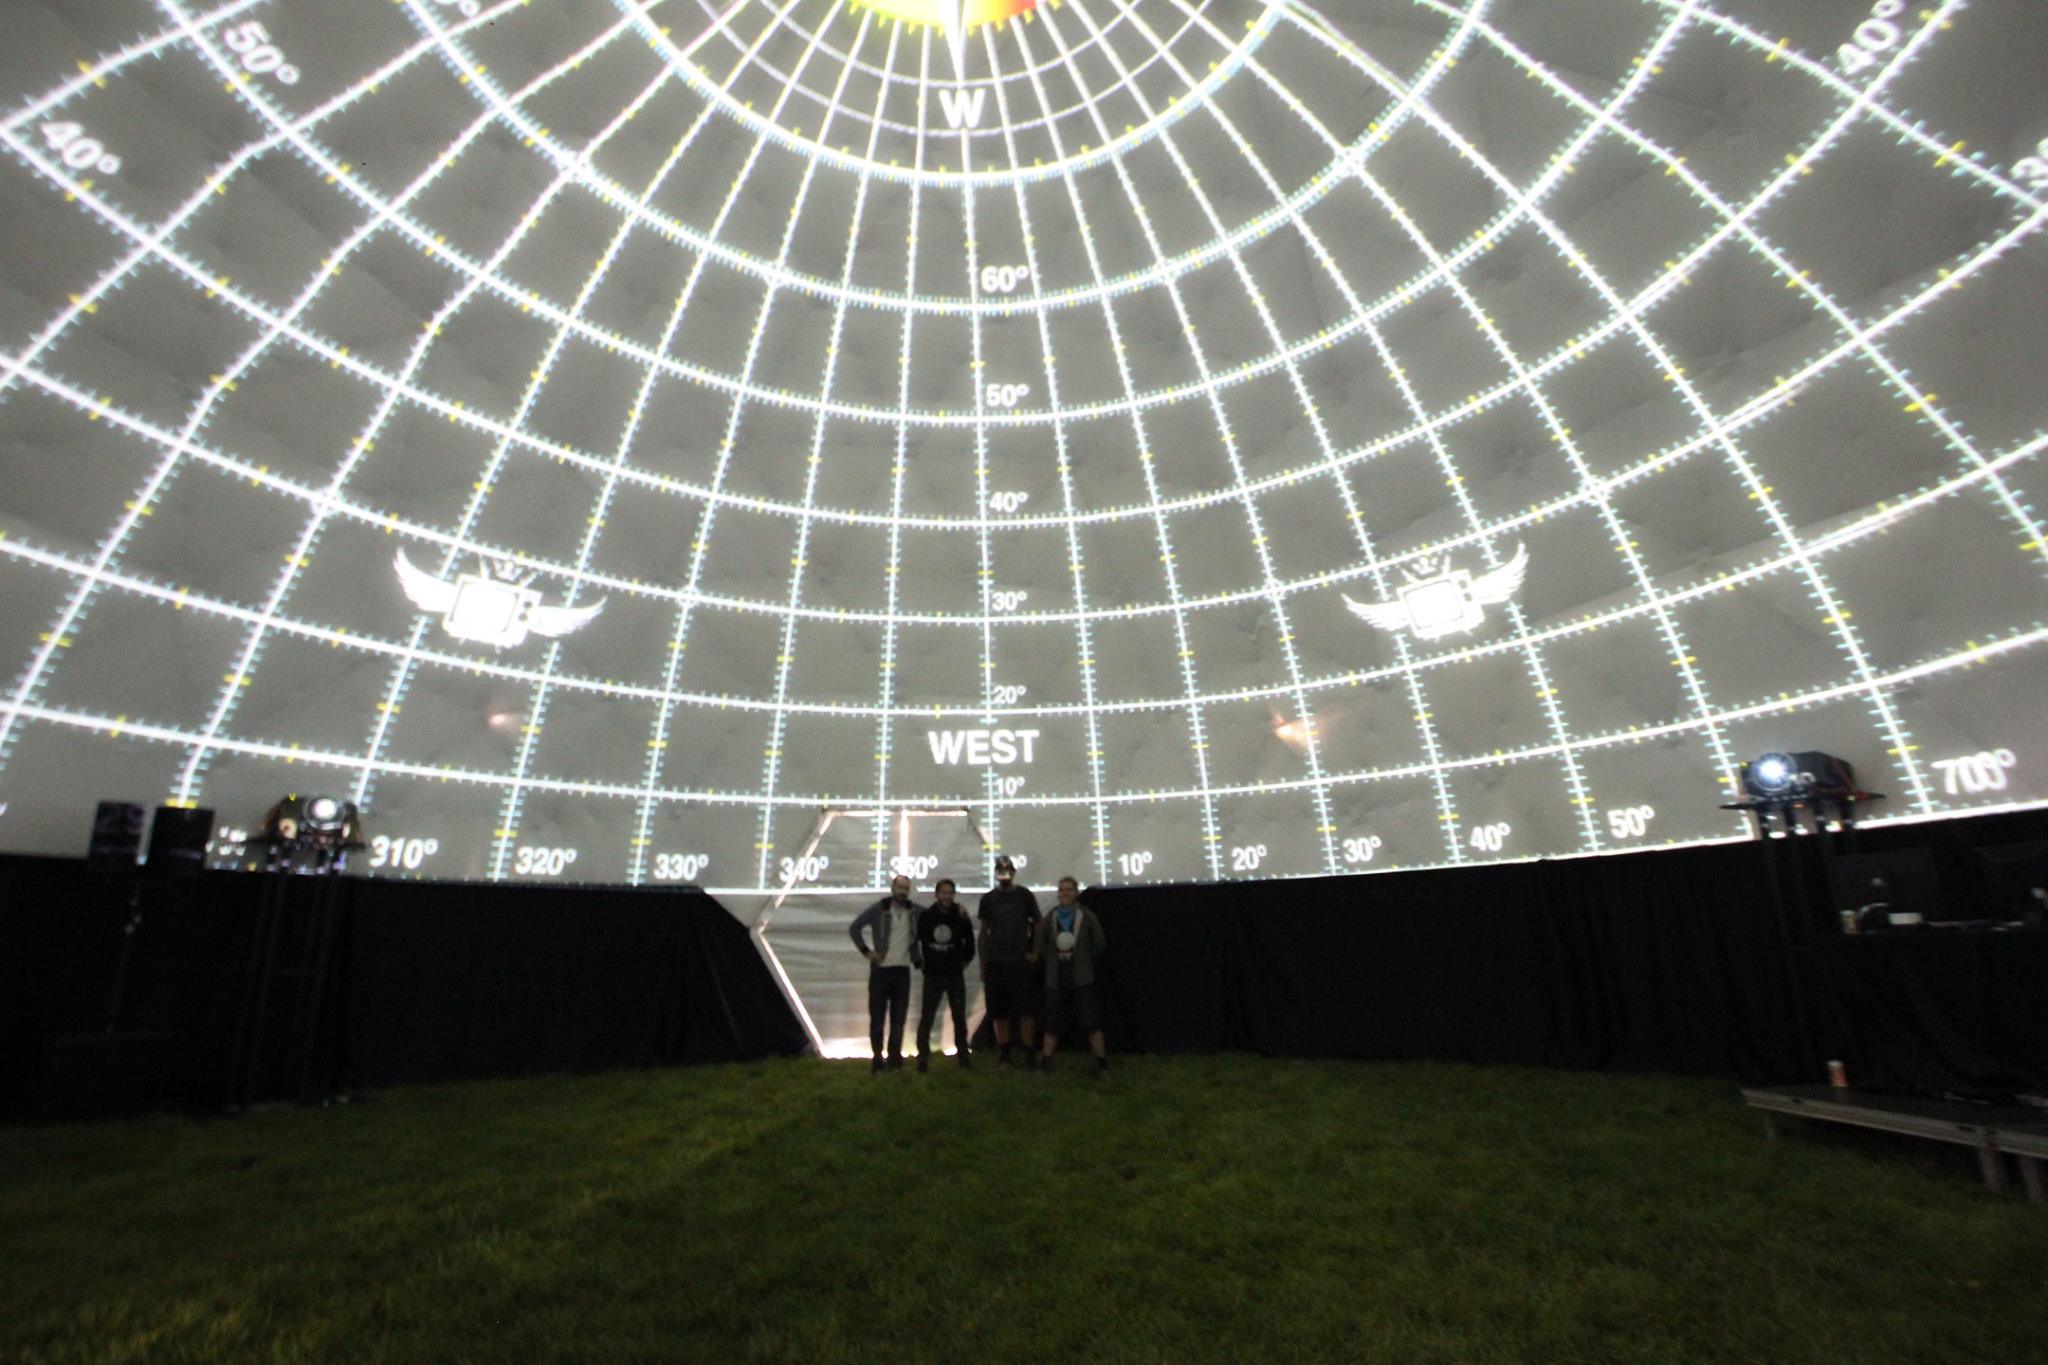 Dome mapping